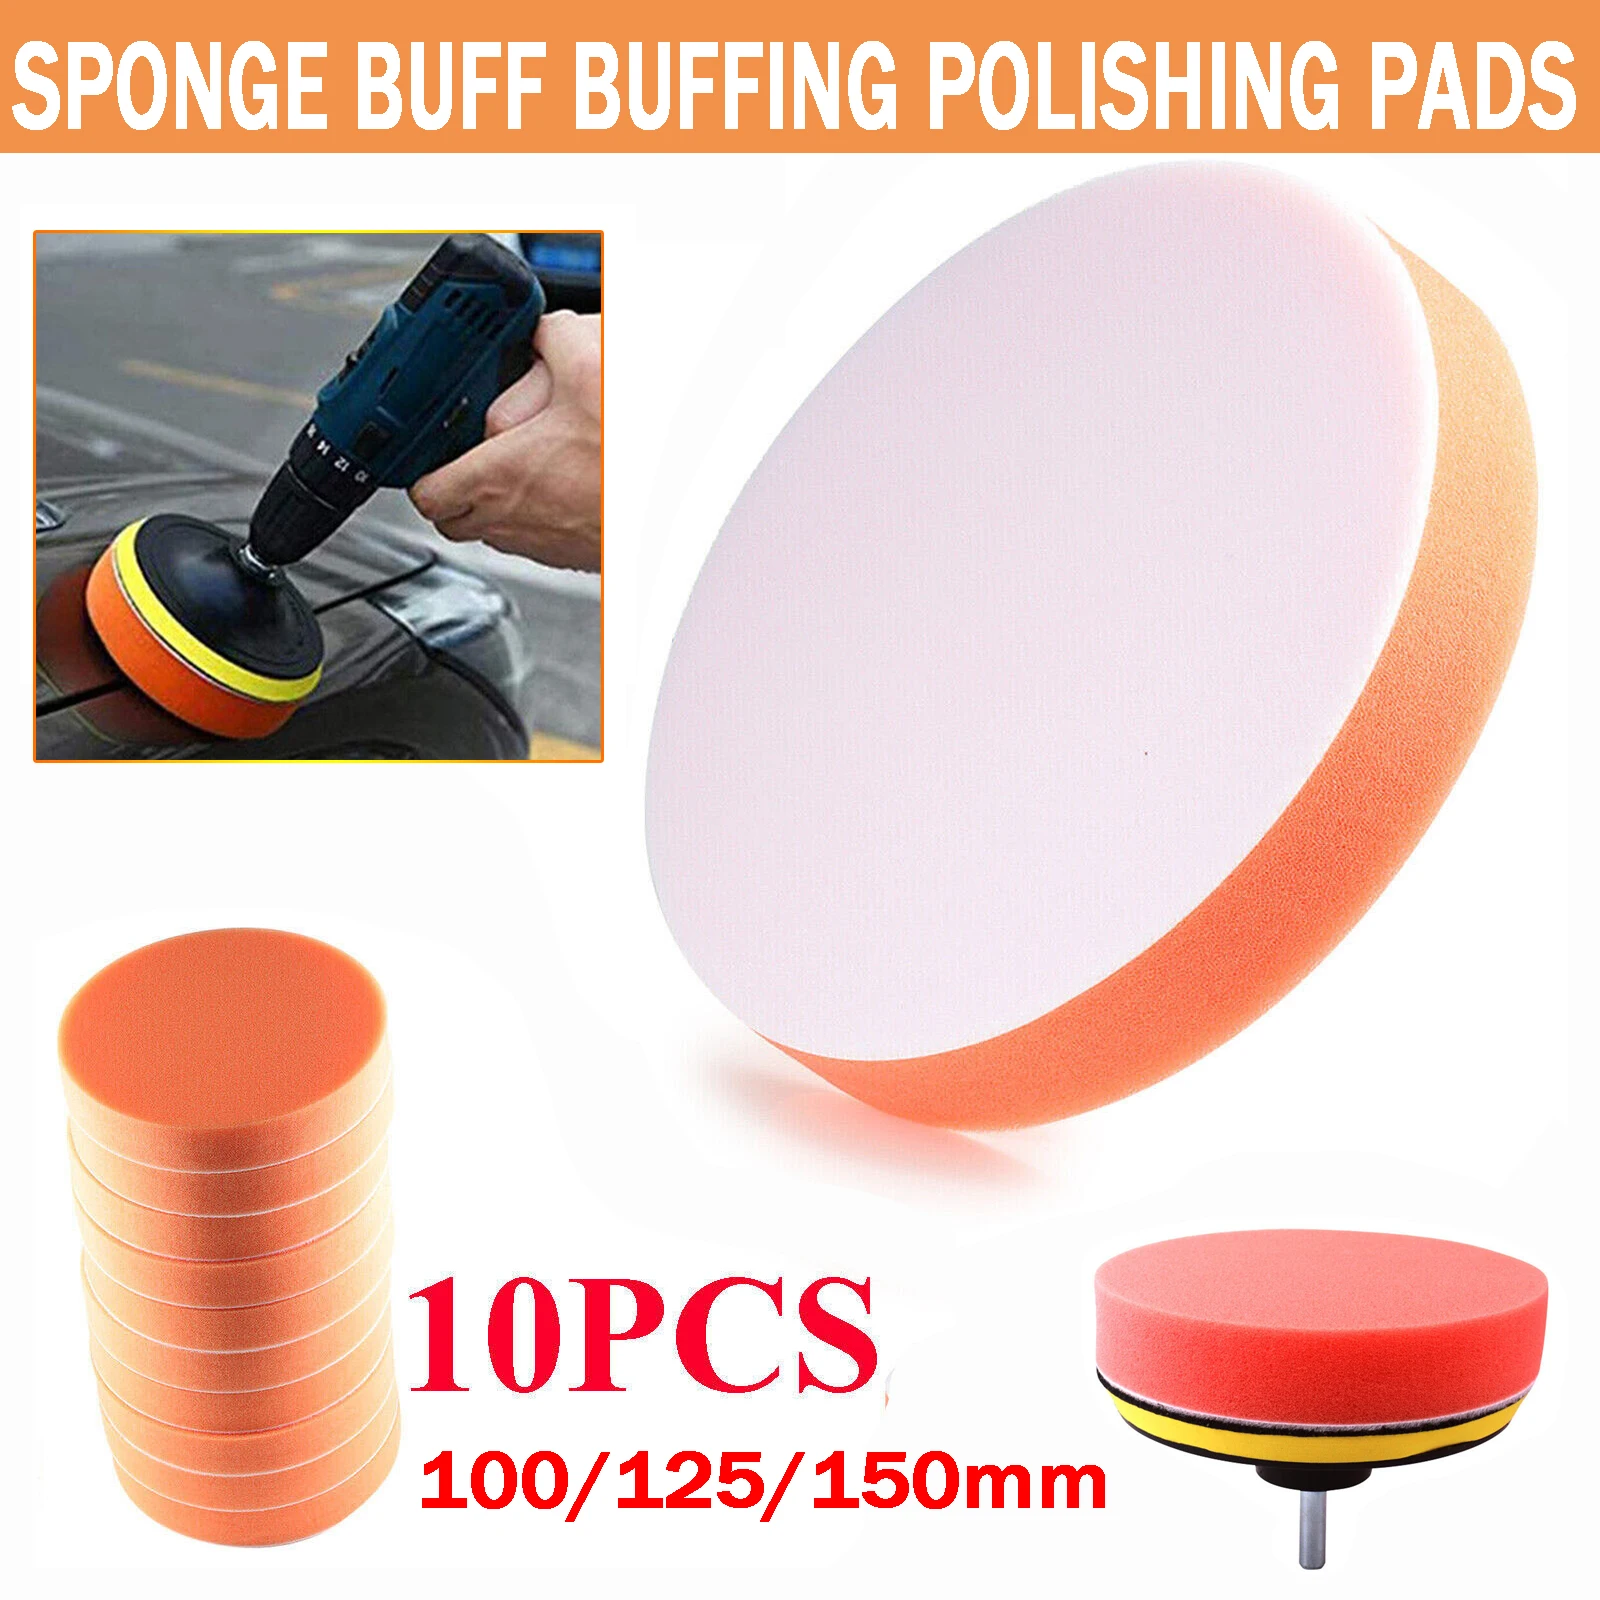 10pcs Car Buffing Polishing Pads 4/5/6 Inch Flat Sponge Waxing Pad Kit For Car Polisher Removes Scratches Auto Care Buffing Pads